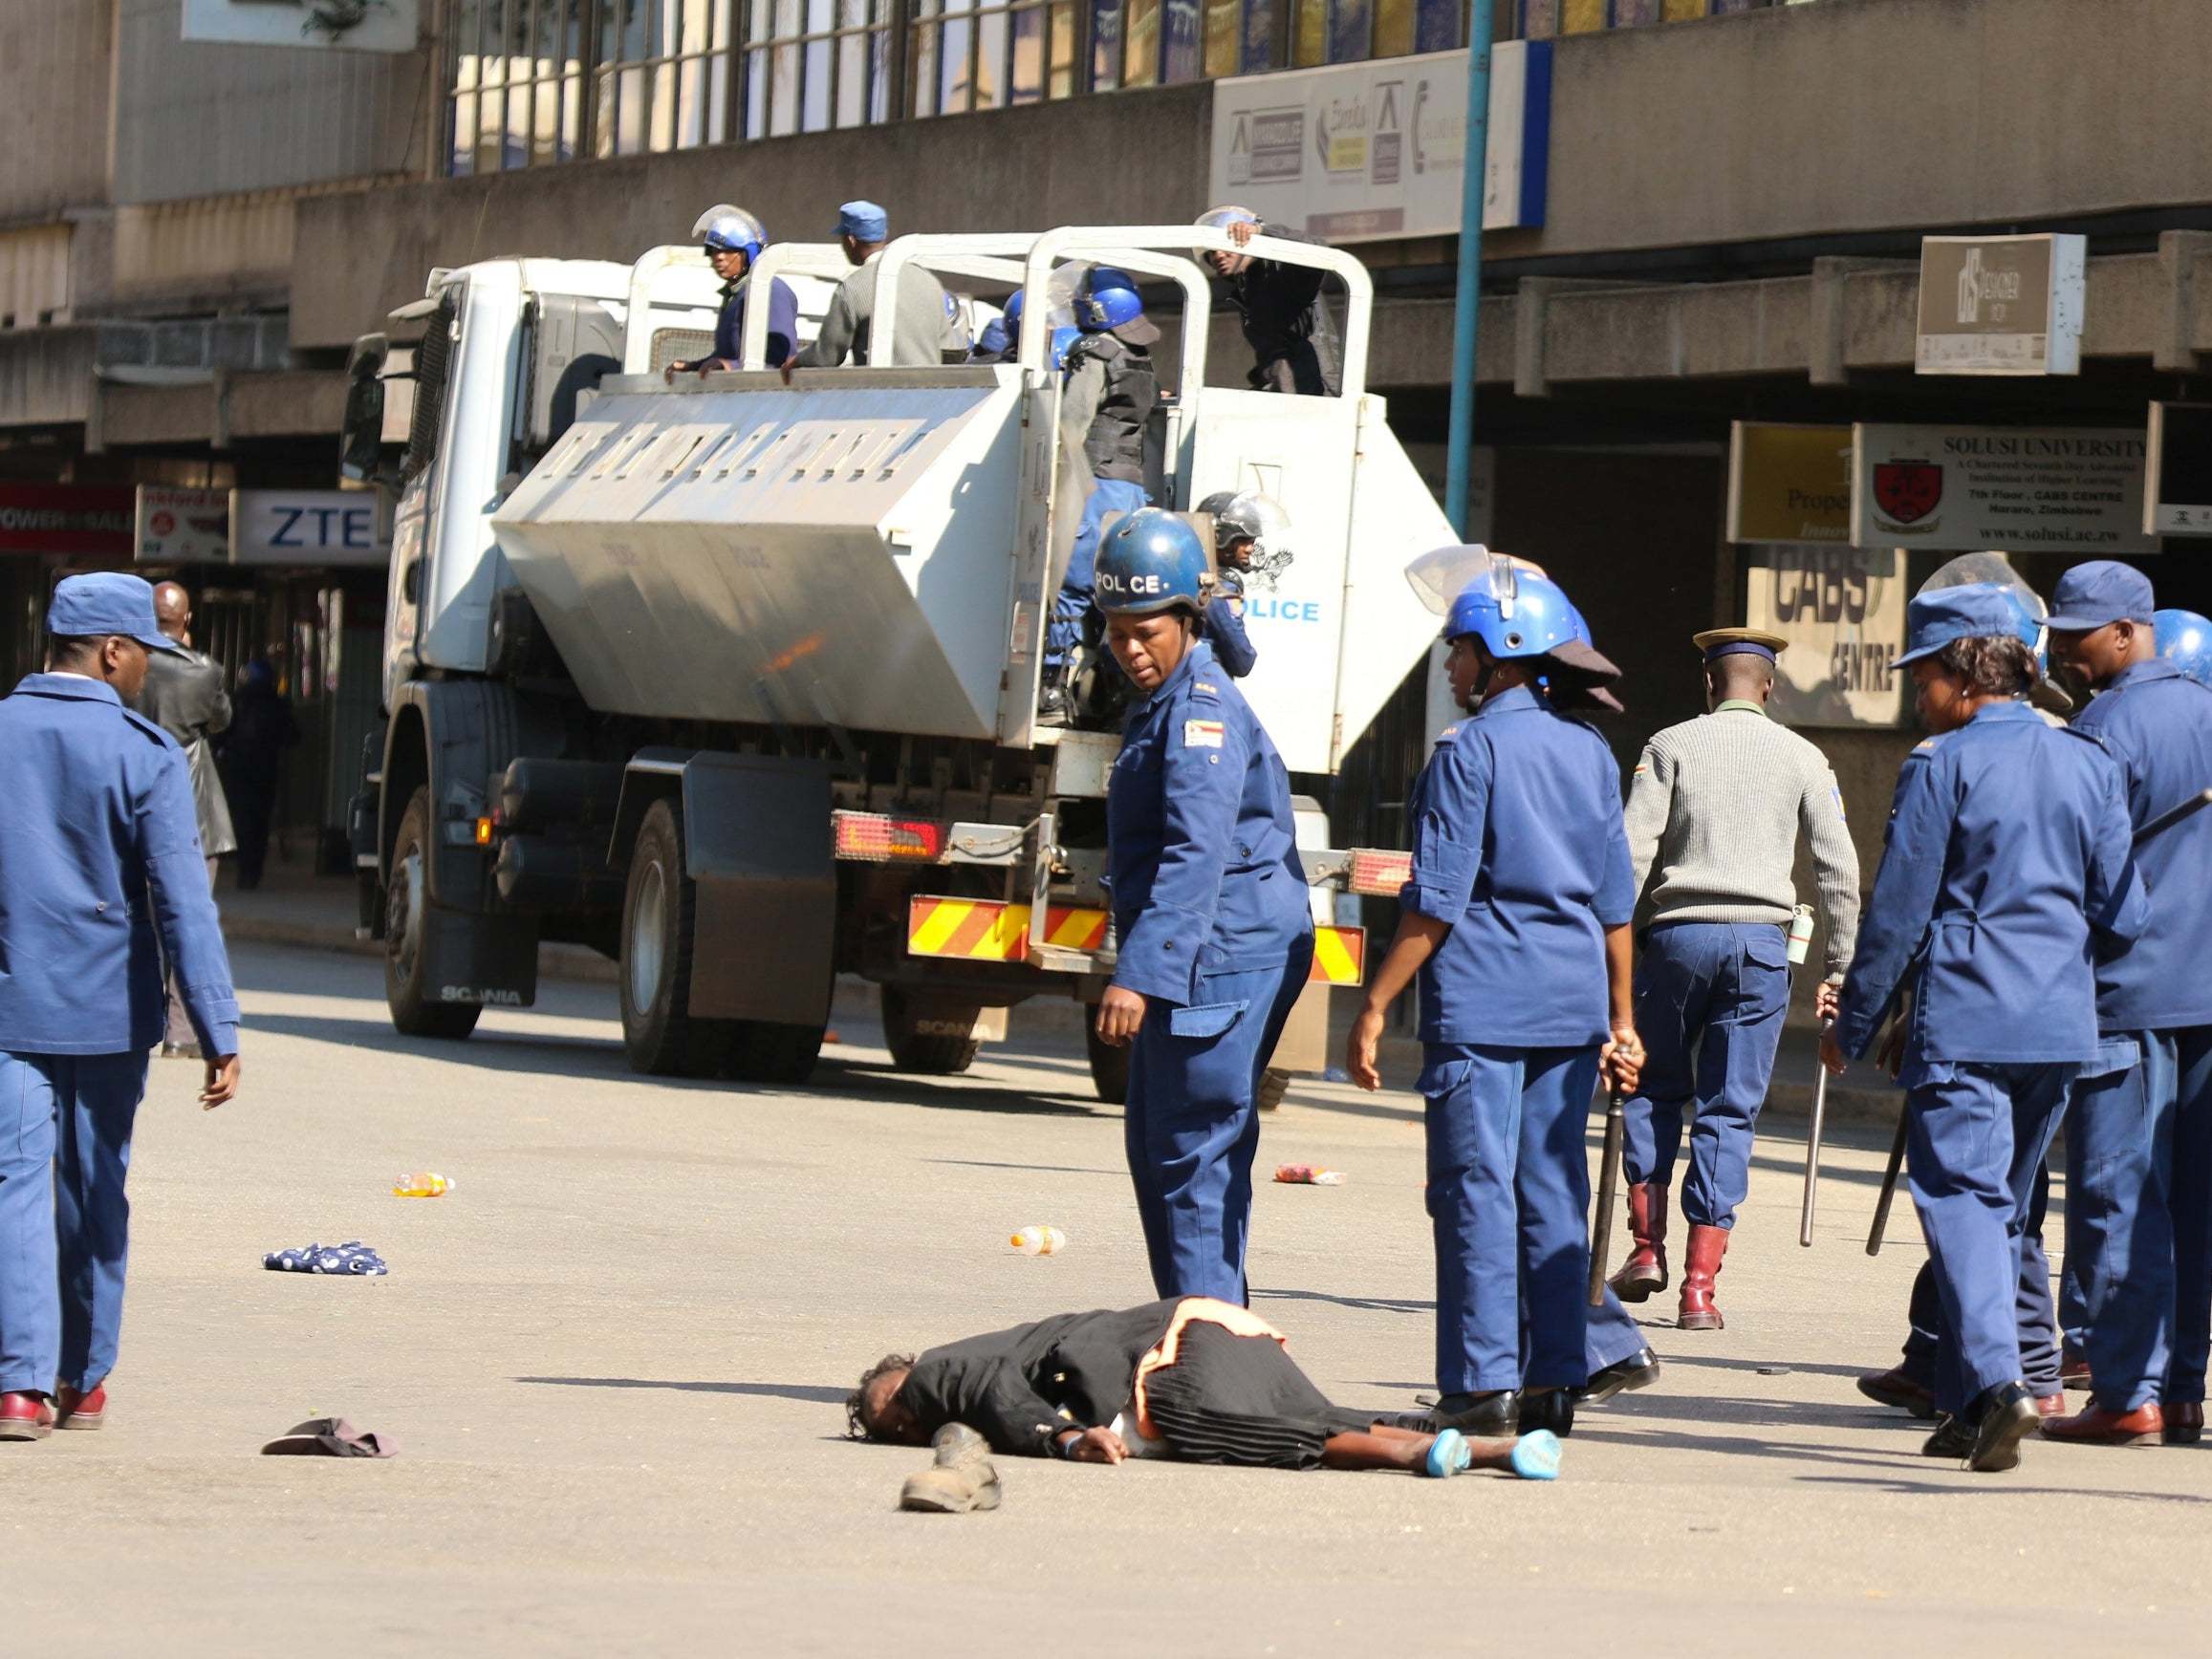 Police stand beside a woman injured woman during clashes in Harare